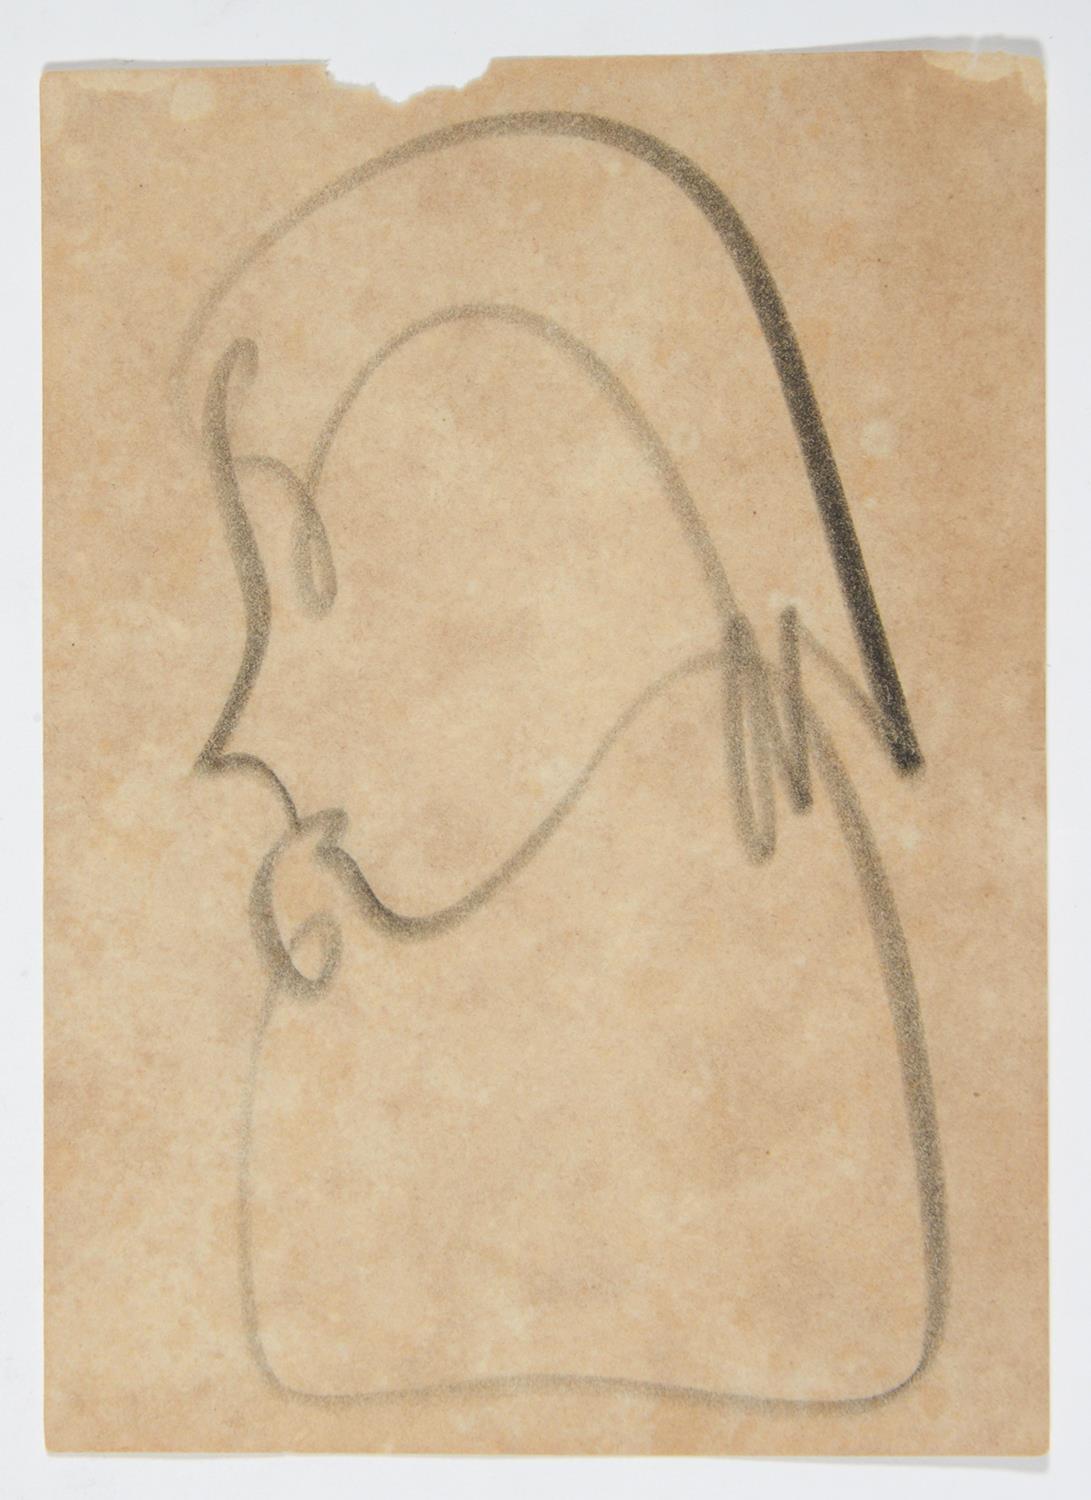 NORMAN DUDLEY SHORT (1882-1951) - A COLLECTION OF SHORT'S ORIGINAL ONE-LINE DRAWINGS, INCLUDING